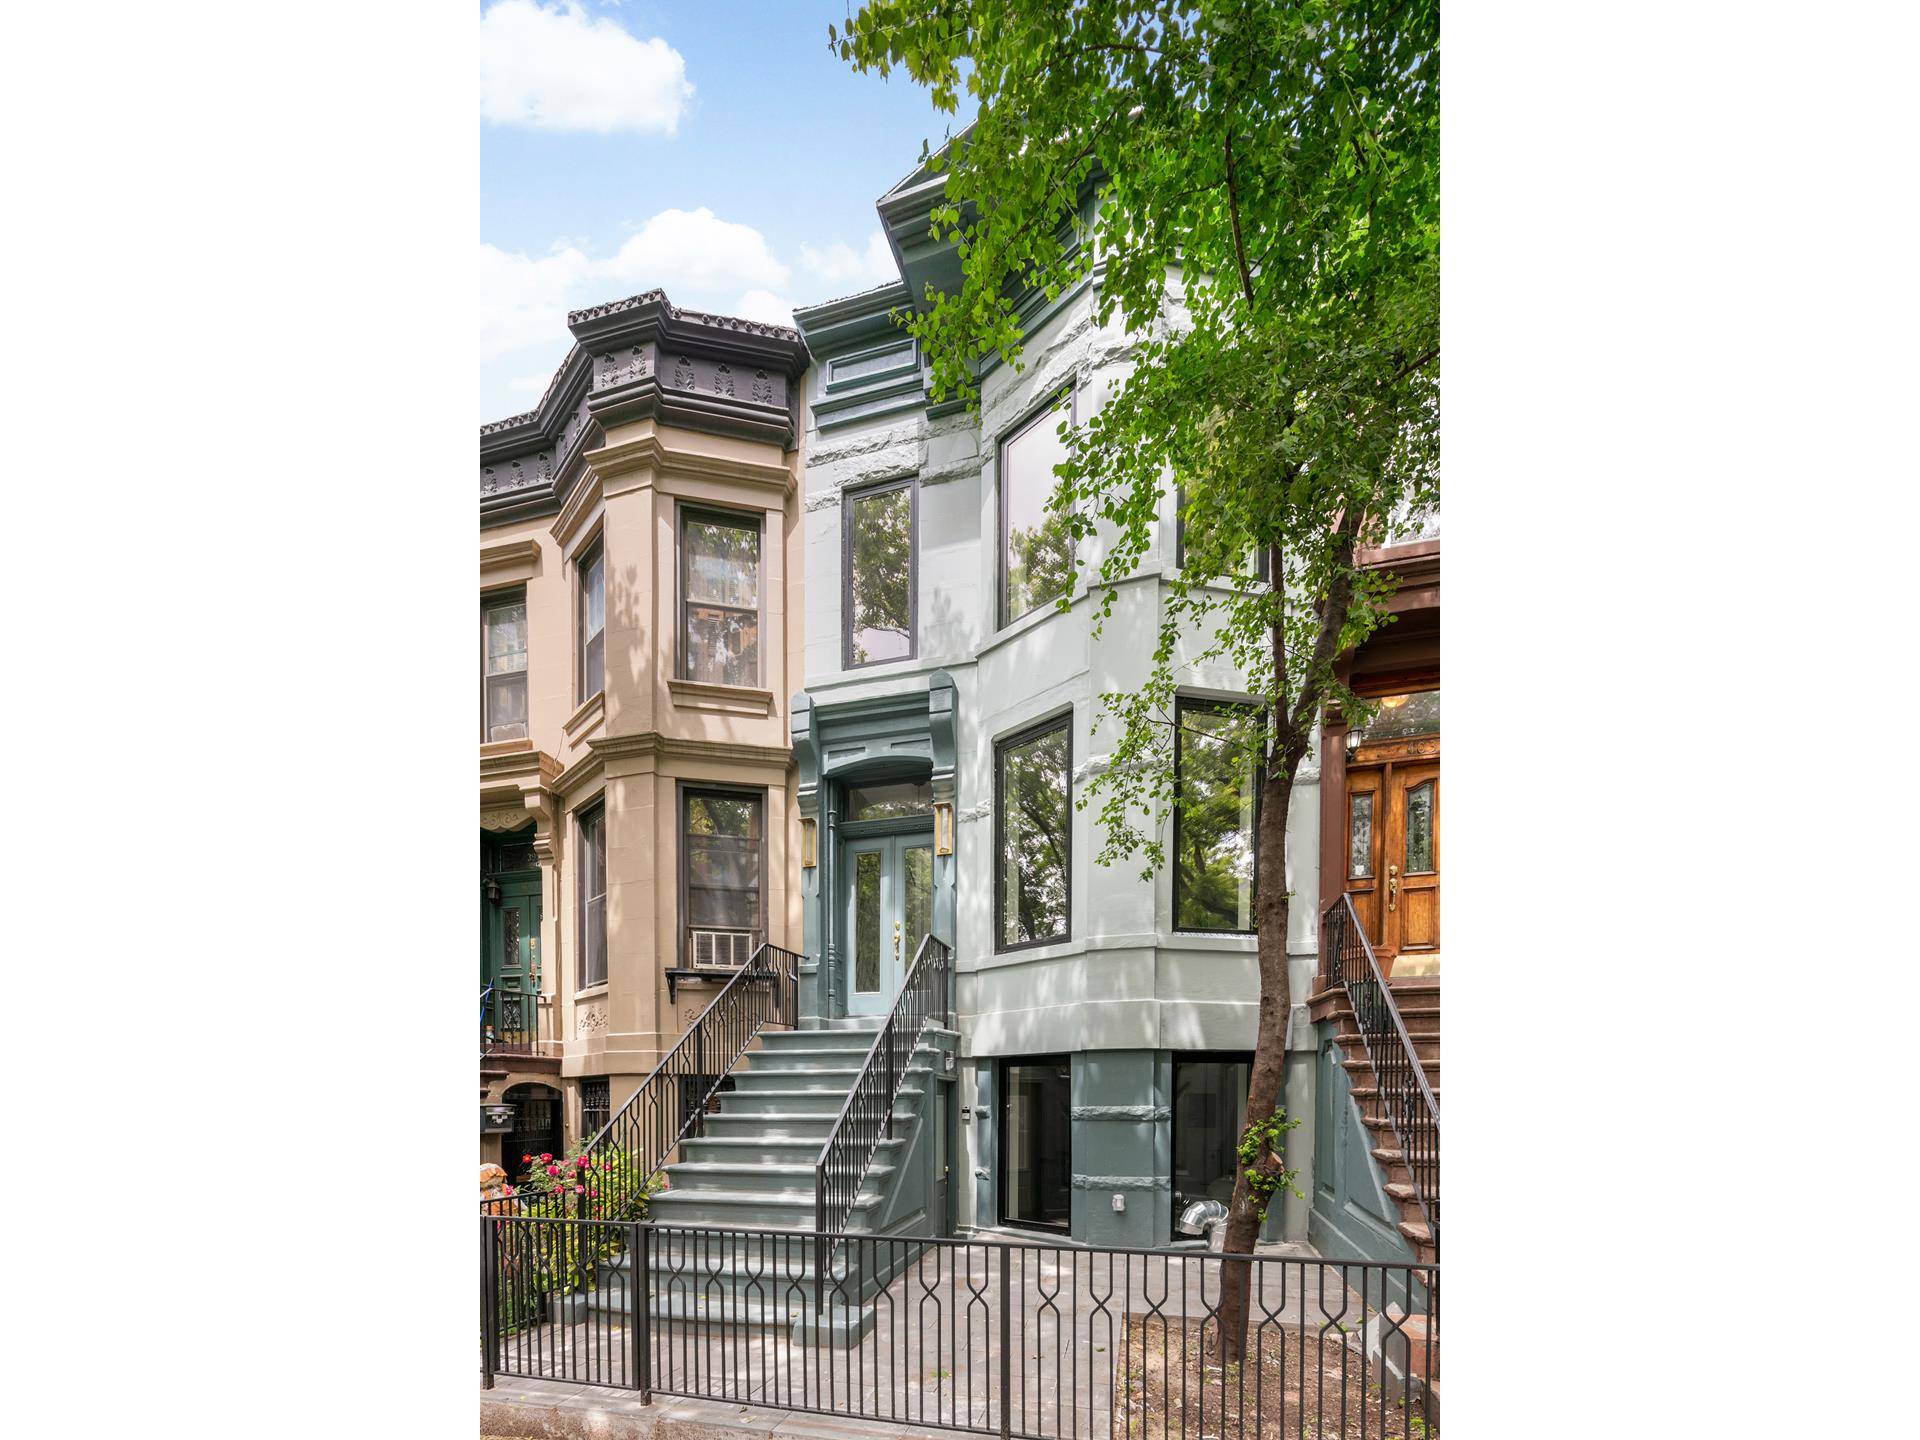 Fully gut renovated 1901 gem in prime Park Slope, minutes from Prospect Park, the vibrant 5th and 7th Avenue corridors and all amenities !